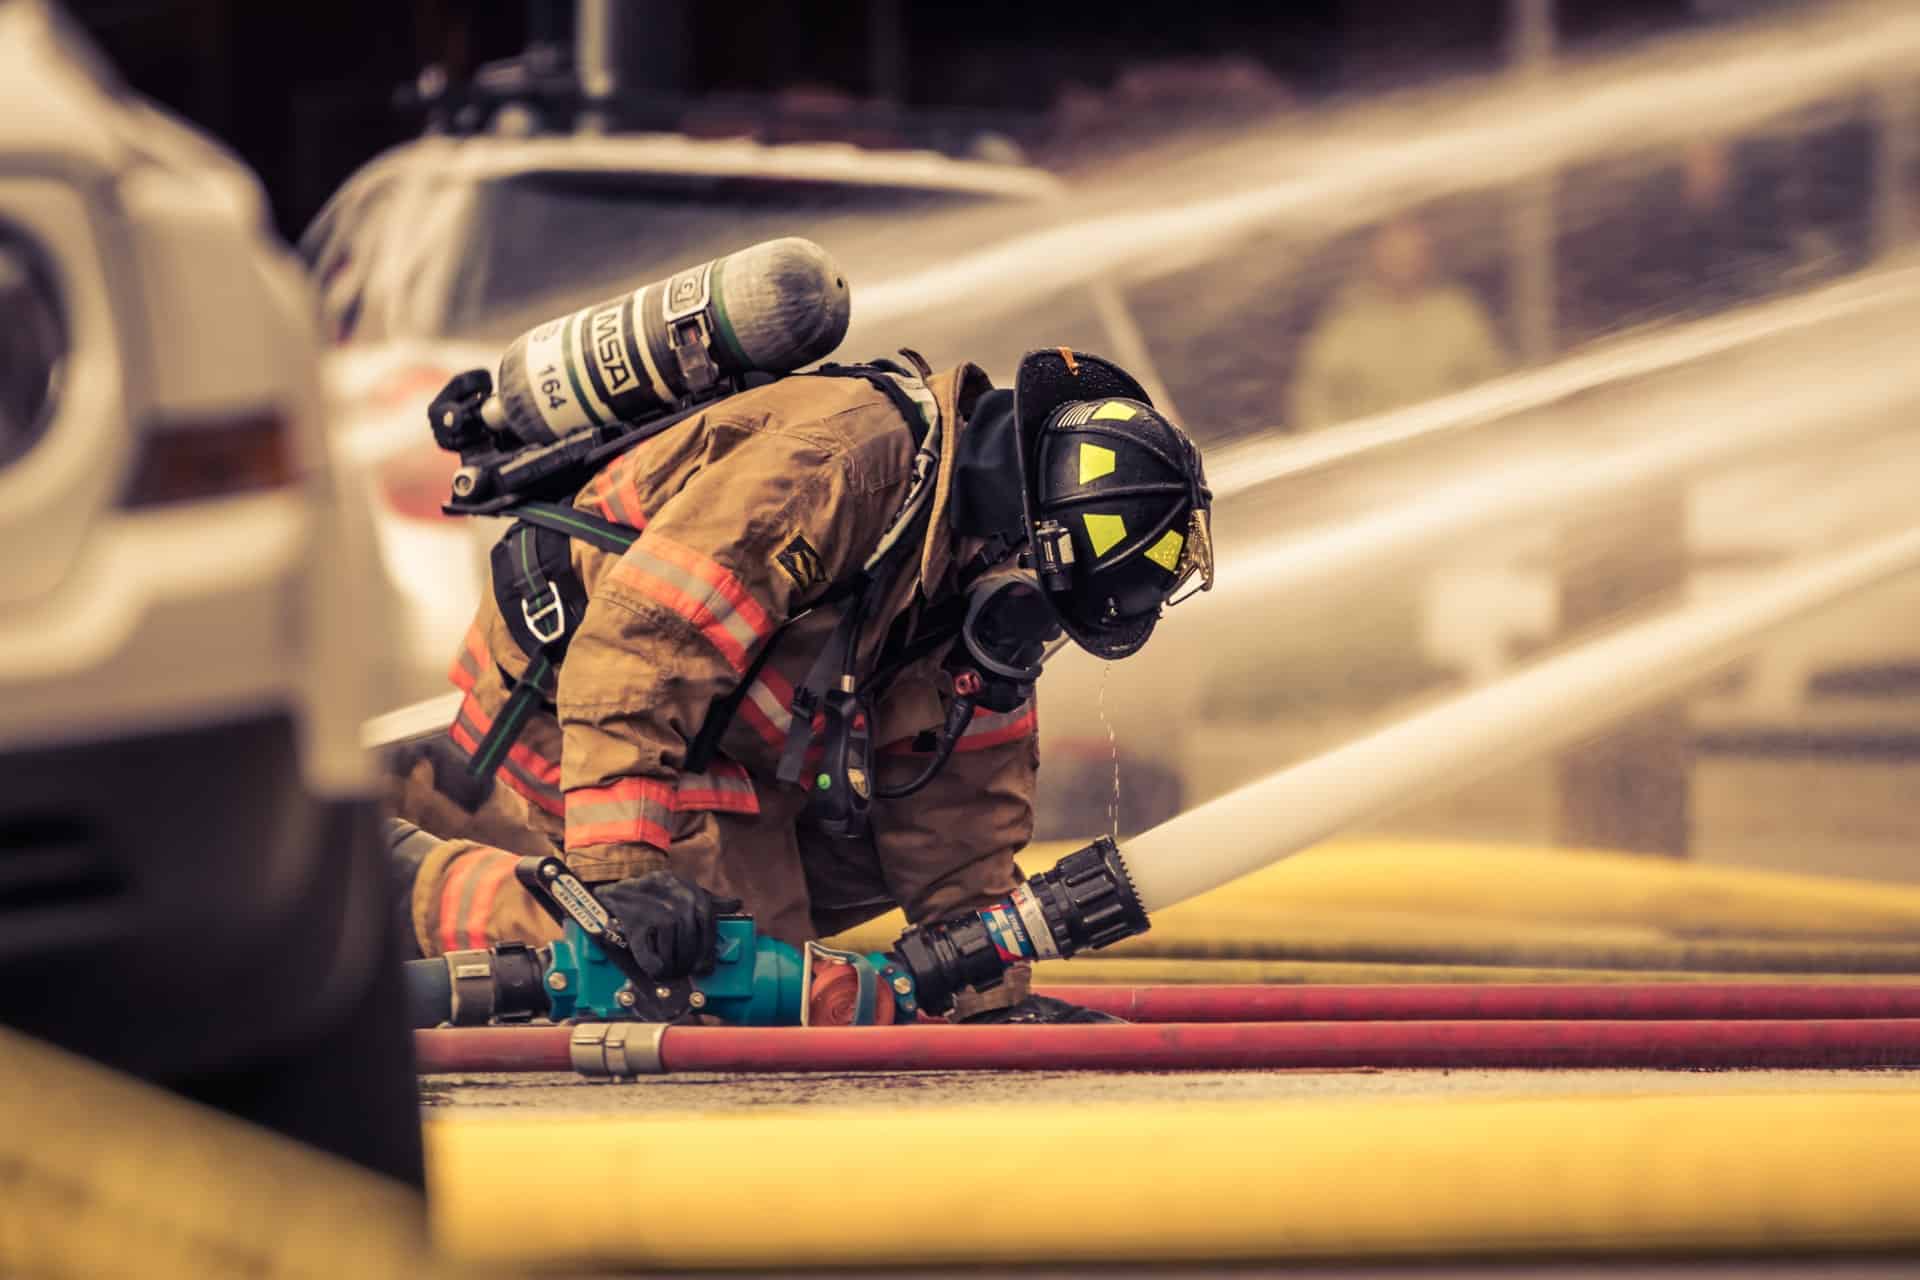 Fire lieutenant jobs can be quite lucrative. Photo by Kevin Bidwell from Pexels.